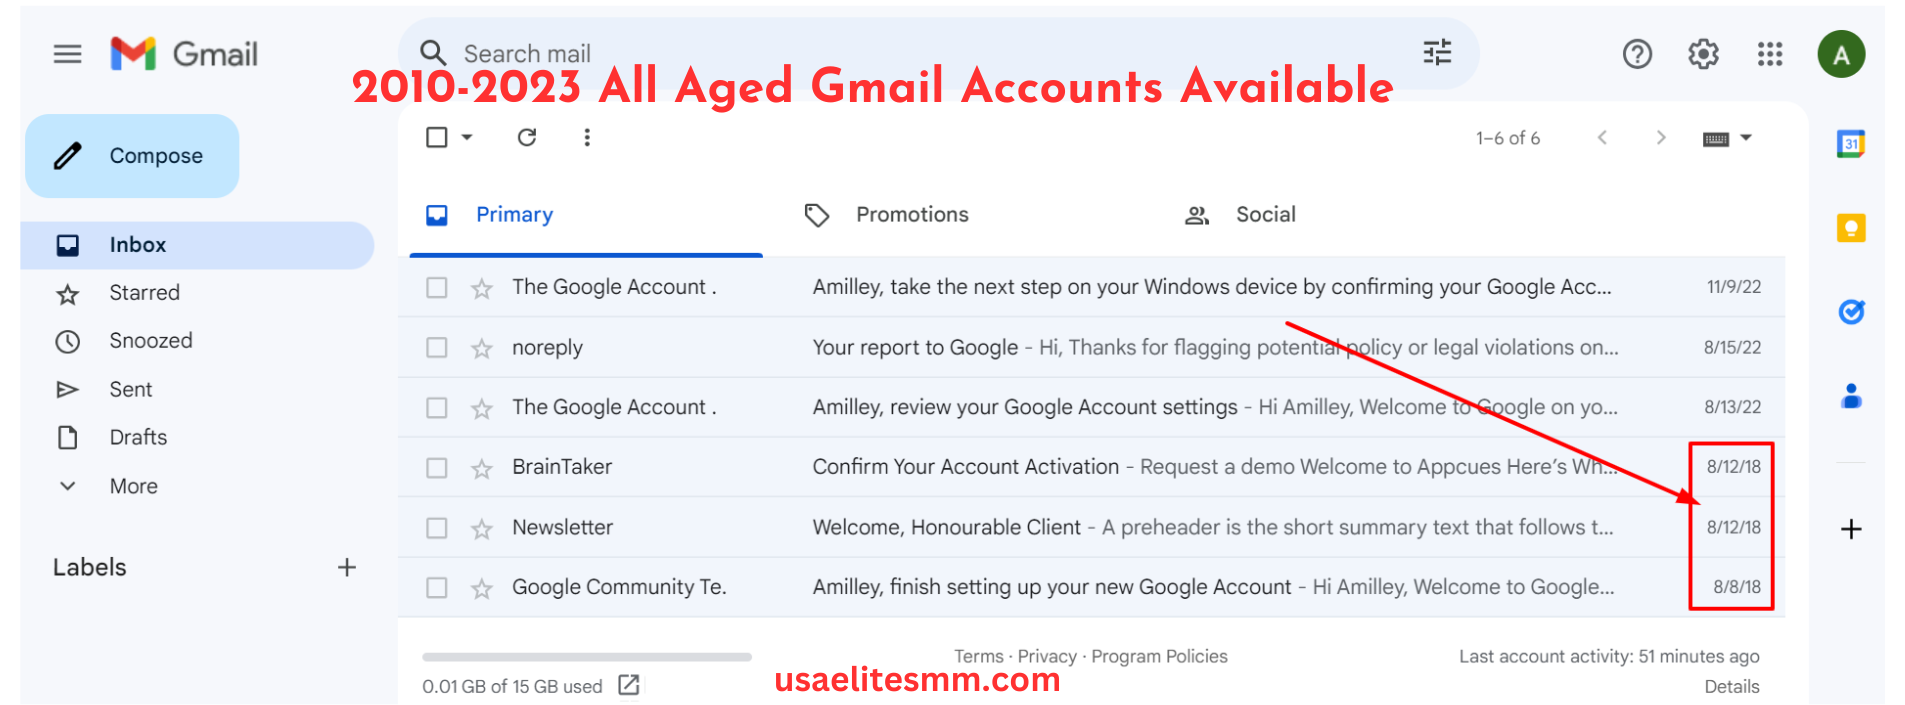 2010-2023 All Aged Gmail Accounts Proof